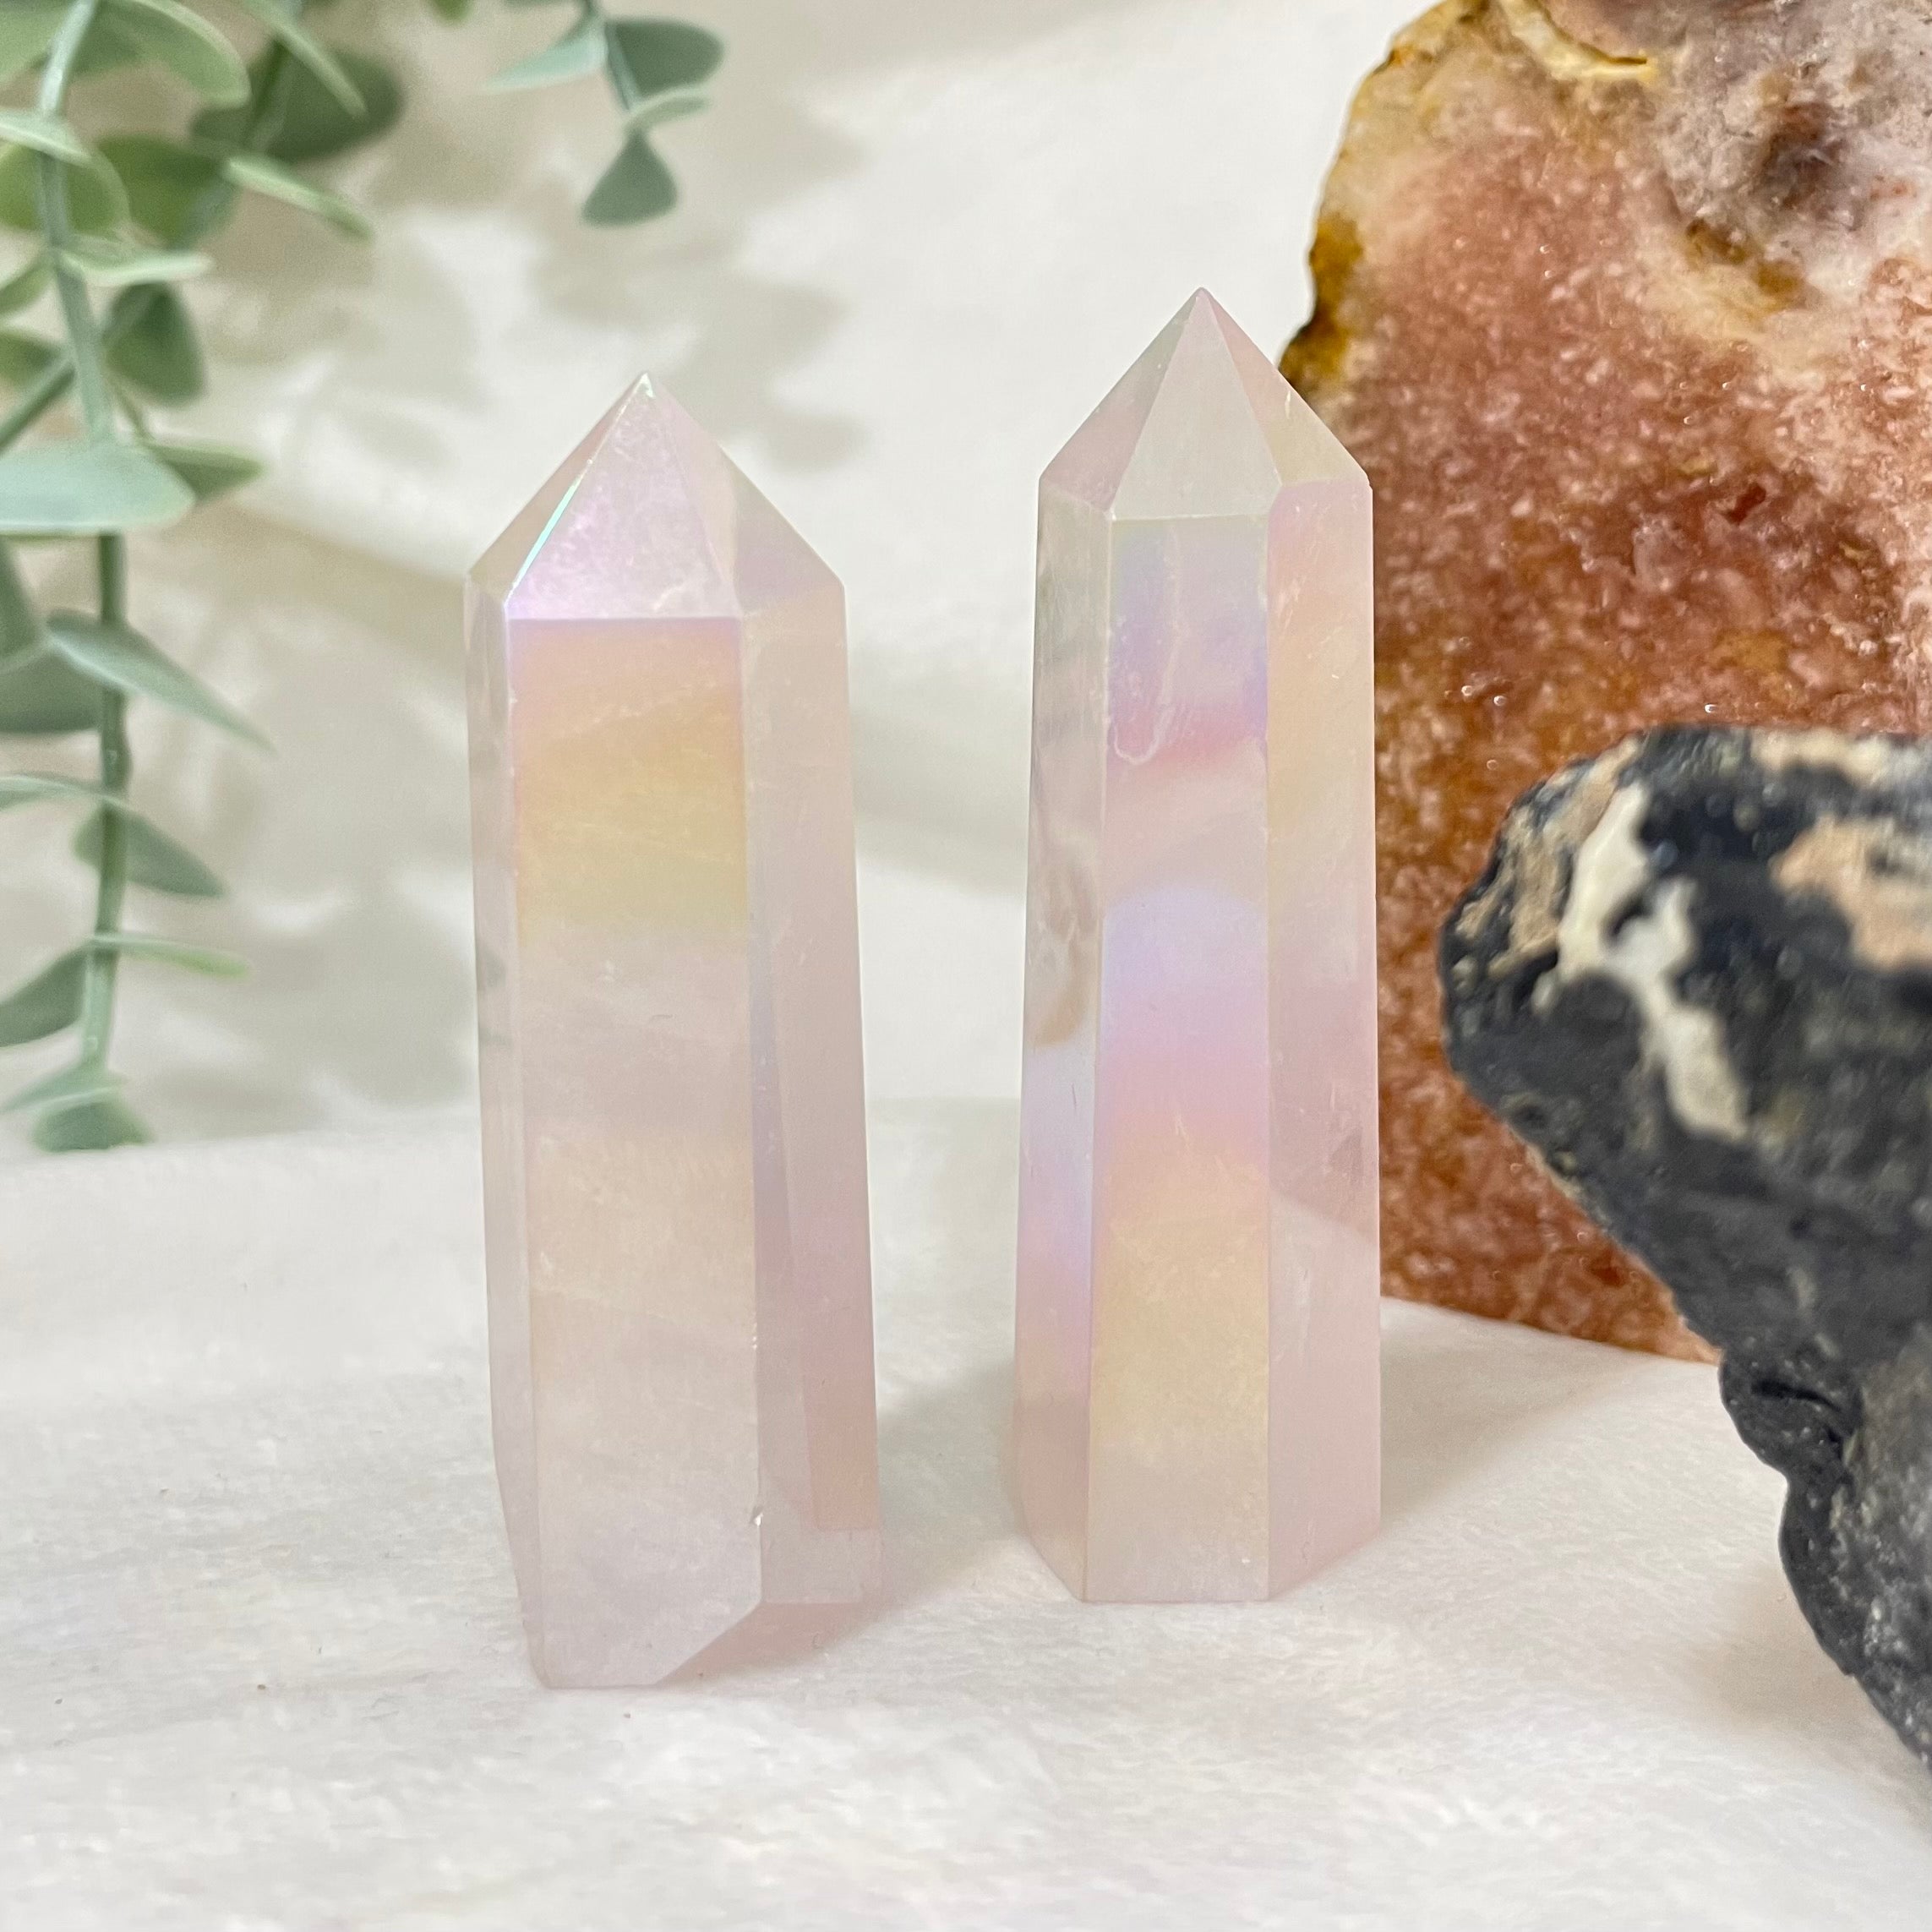 Angel Aura Rose Quartz Crystals The Crystal and Wellness Warehouse Small 